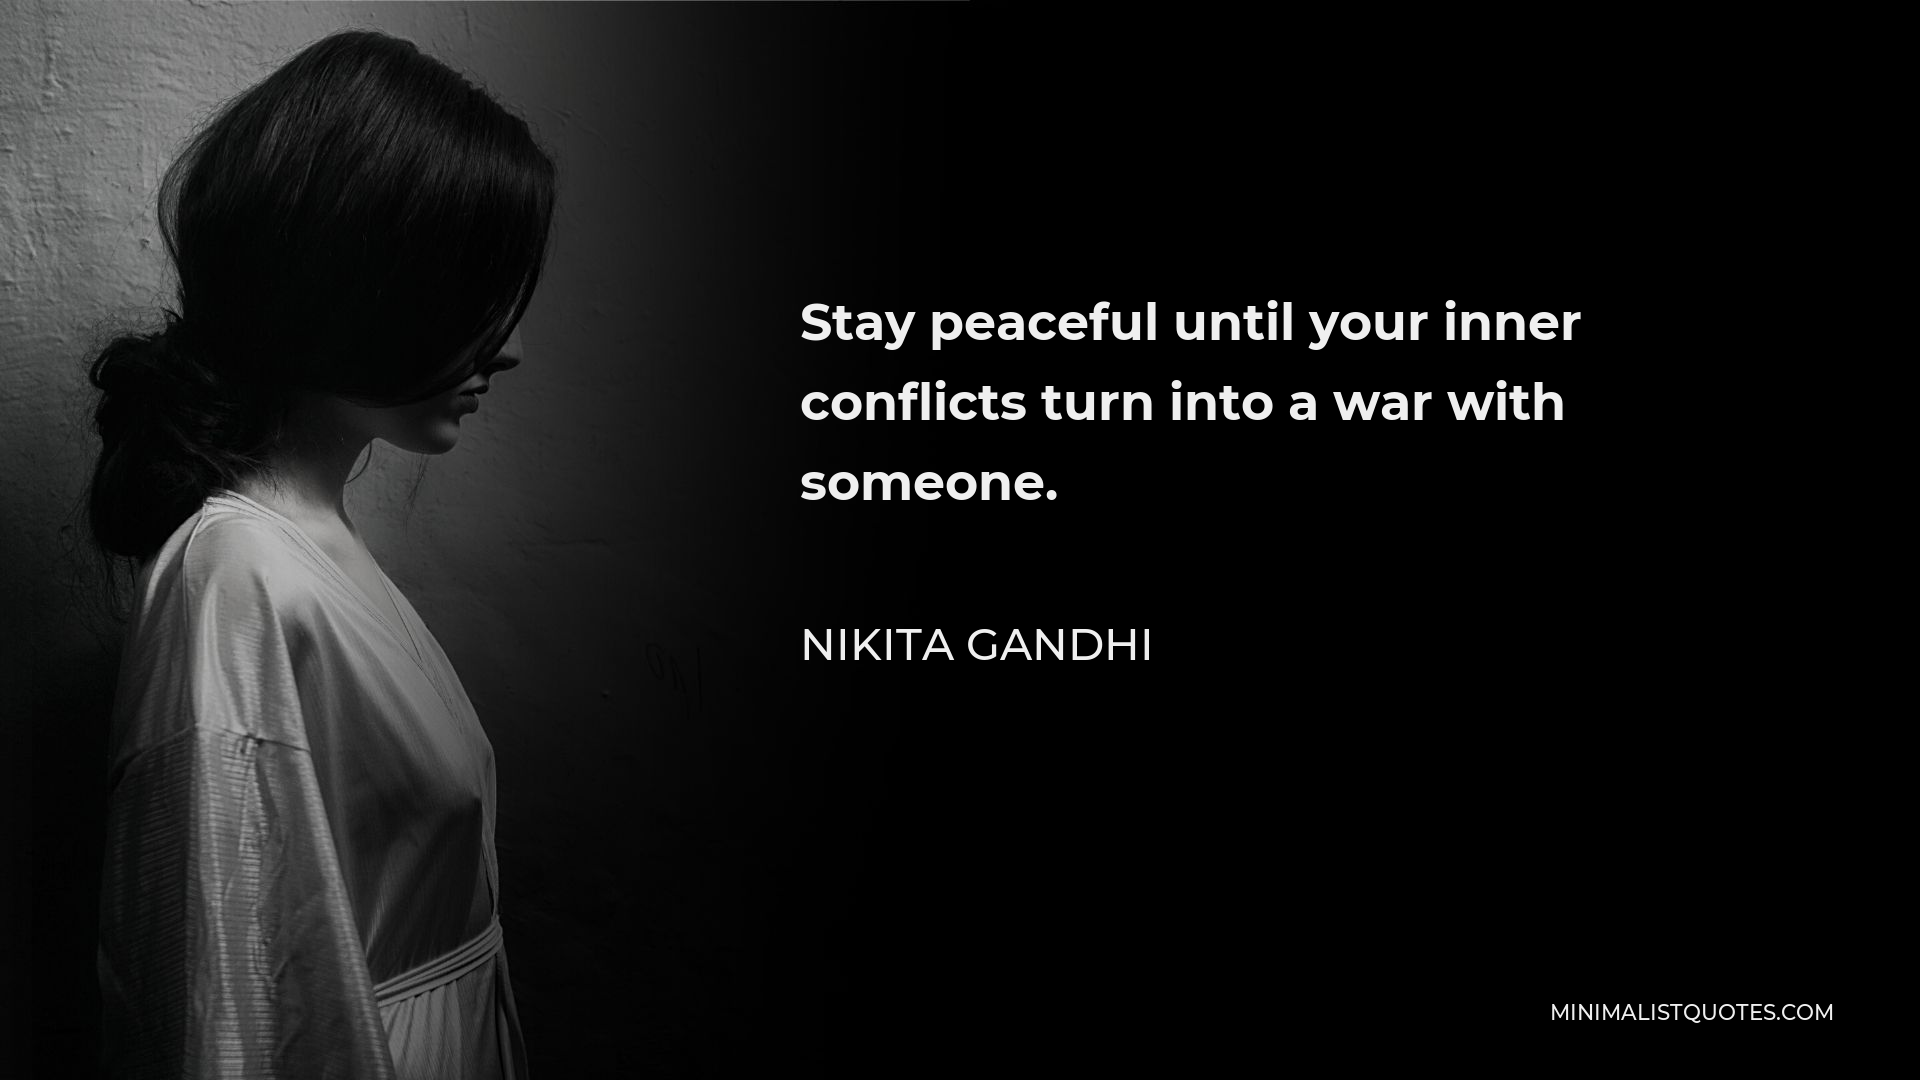 Nikita Gandhi Quote - Stay peaceful until your inner conflicts turn into a war with someone.